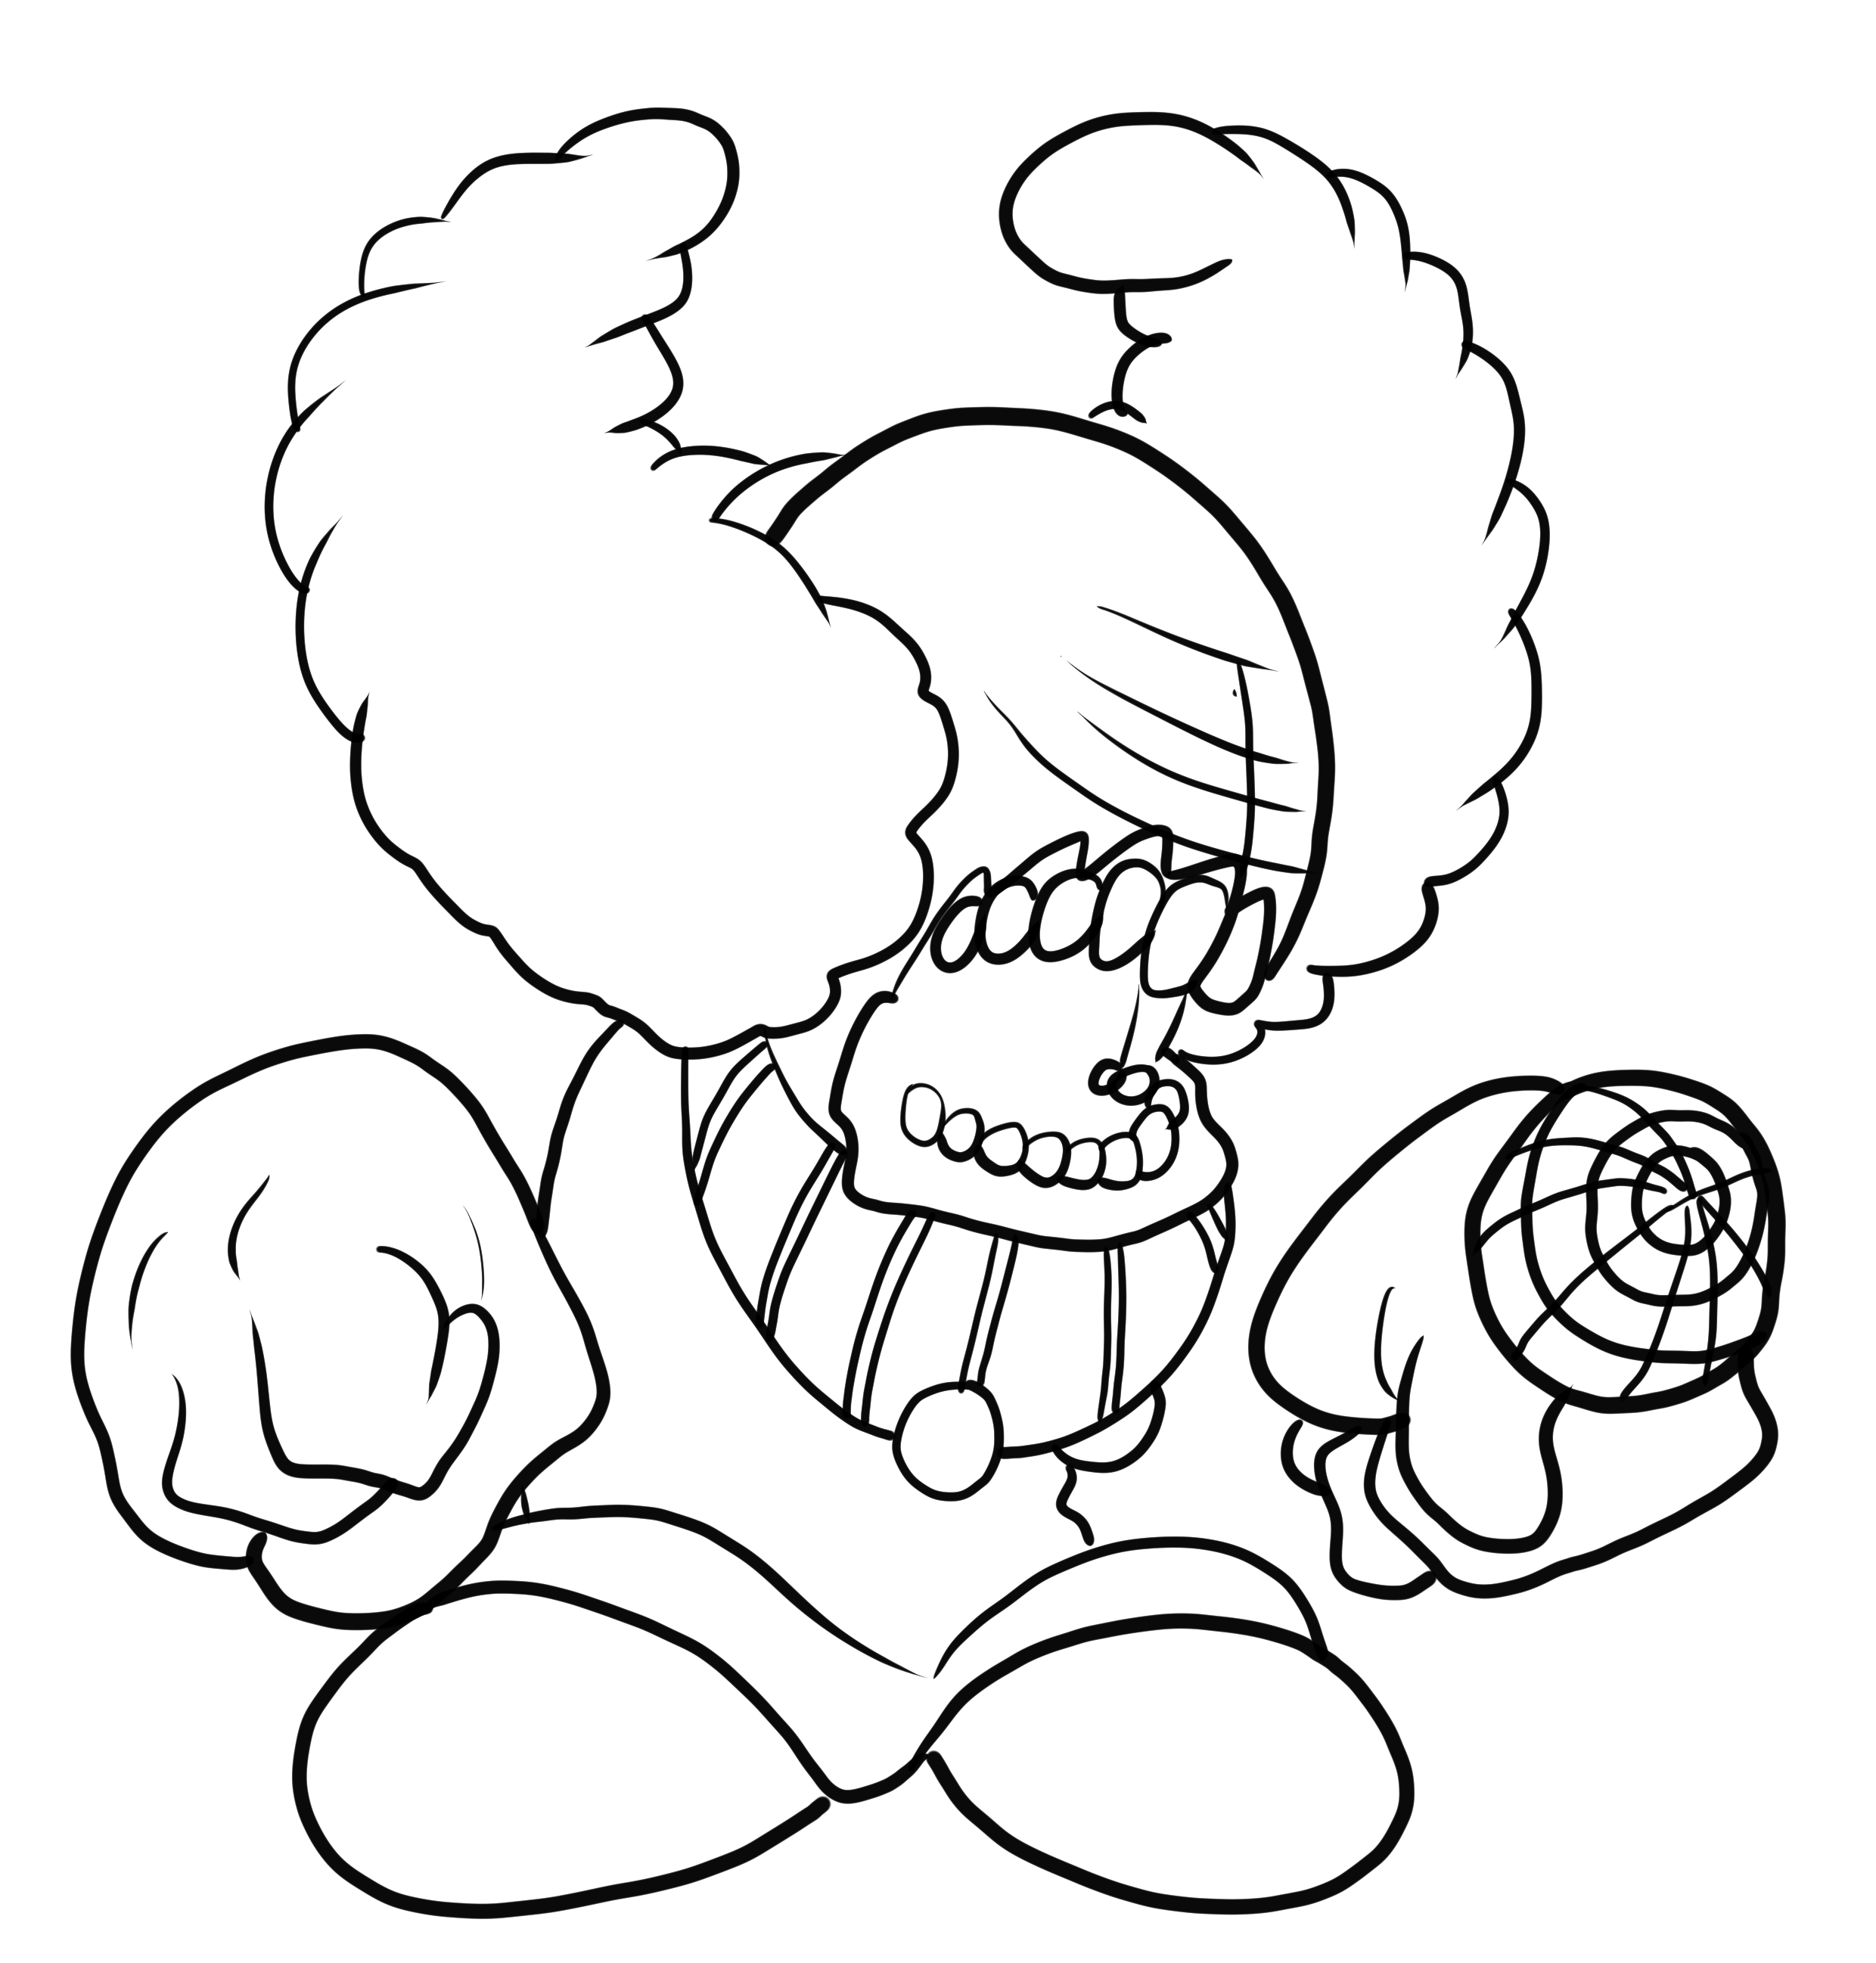 Tricky from Friday Night Funkin coloring pages to print and coloring